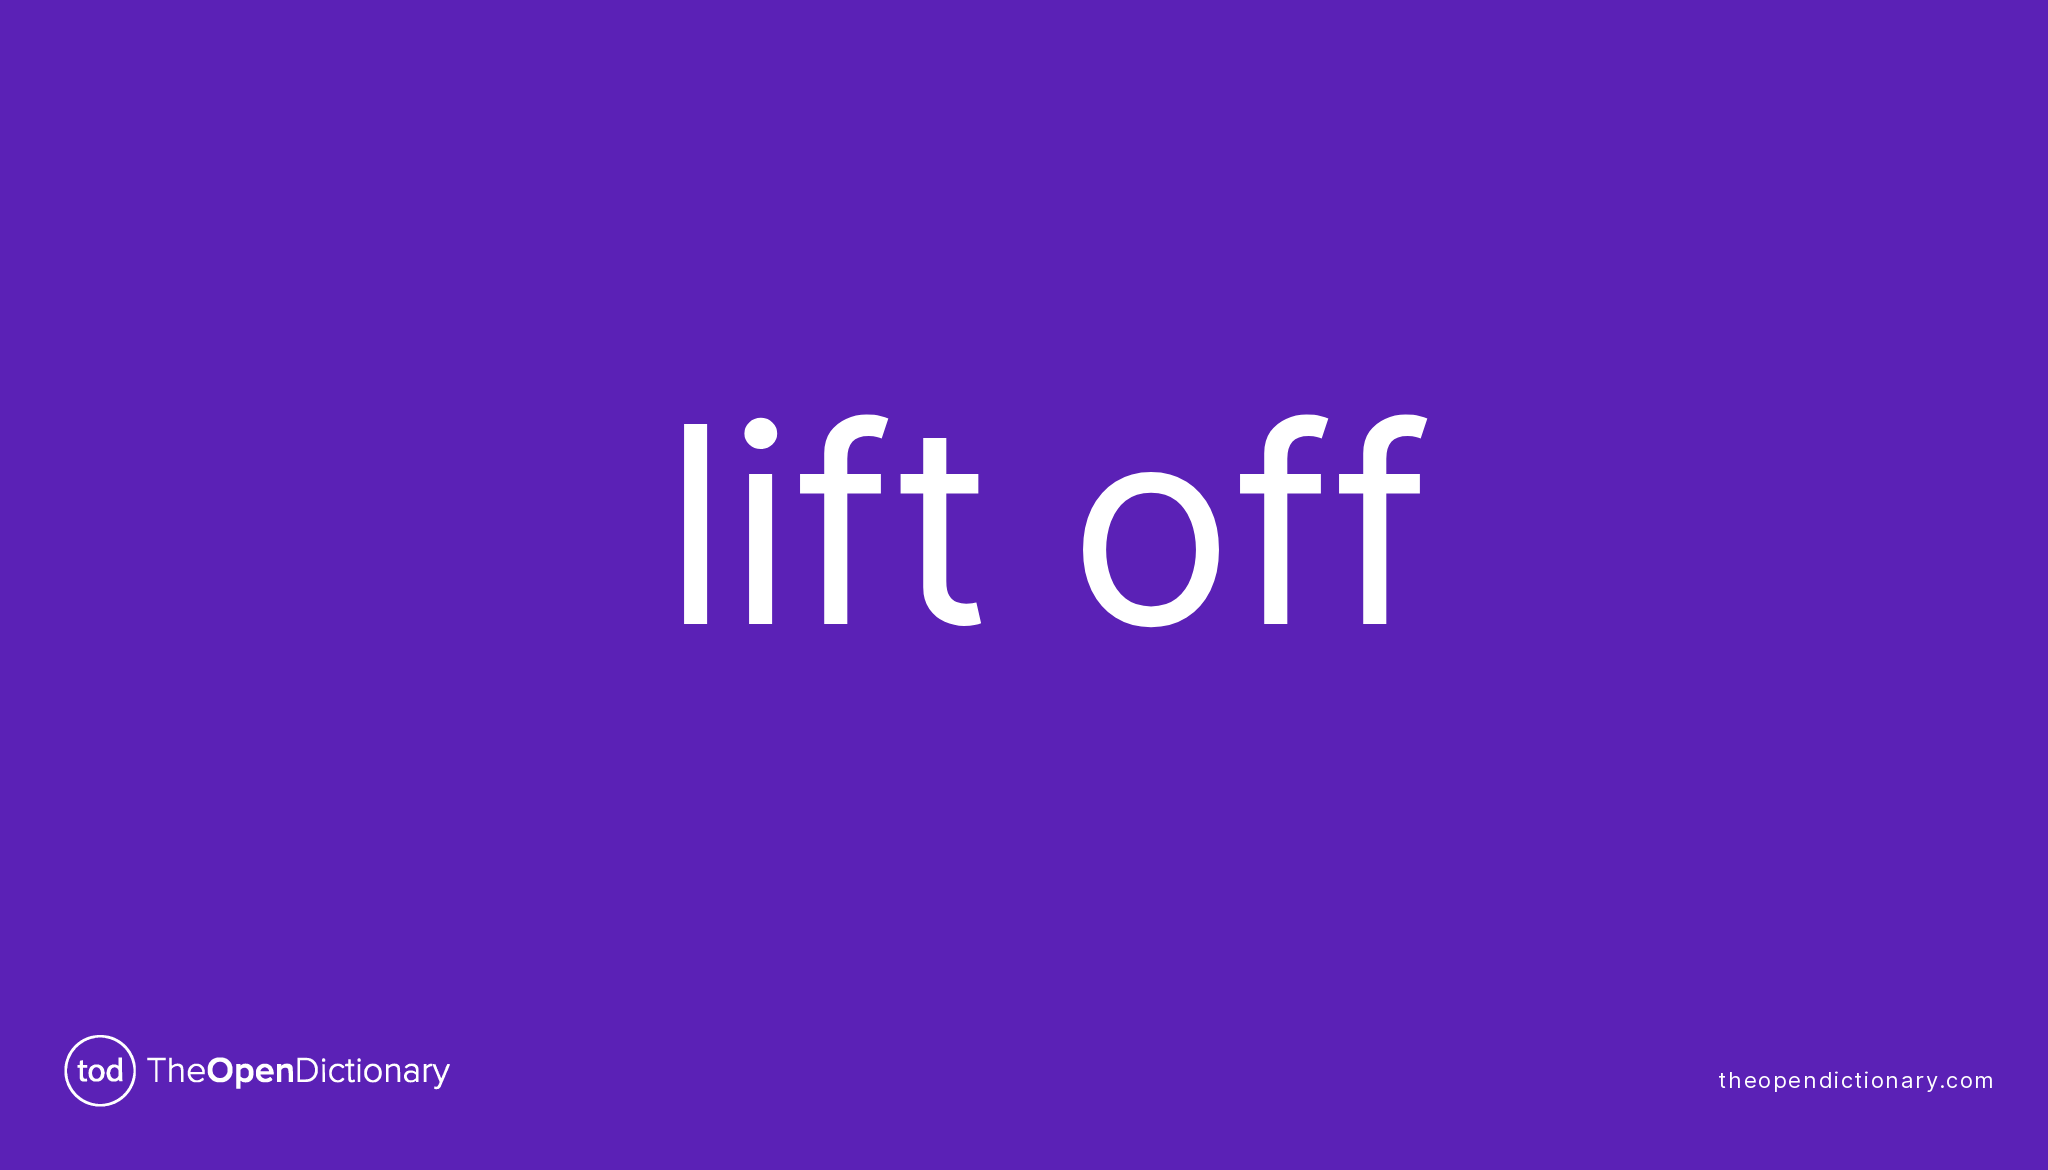 lift-off-phrasal-verb-lift-off-definition-meaning-and-example